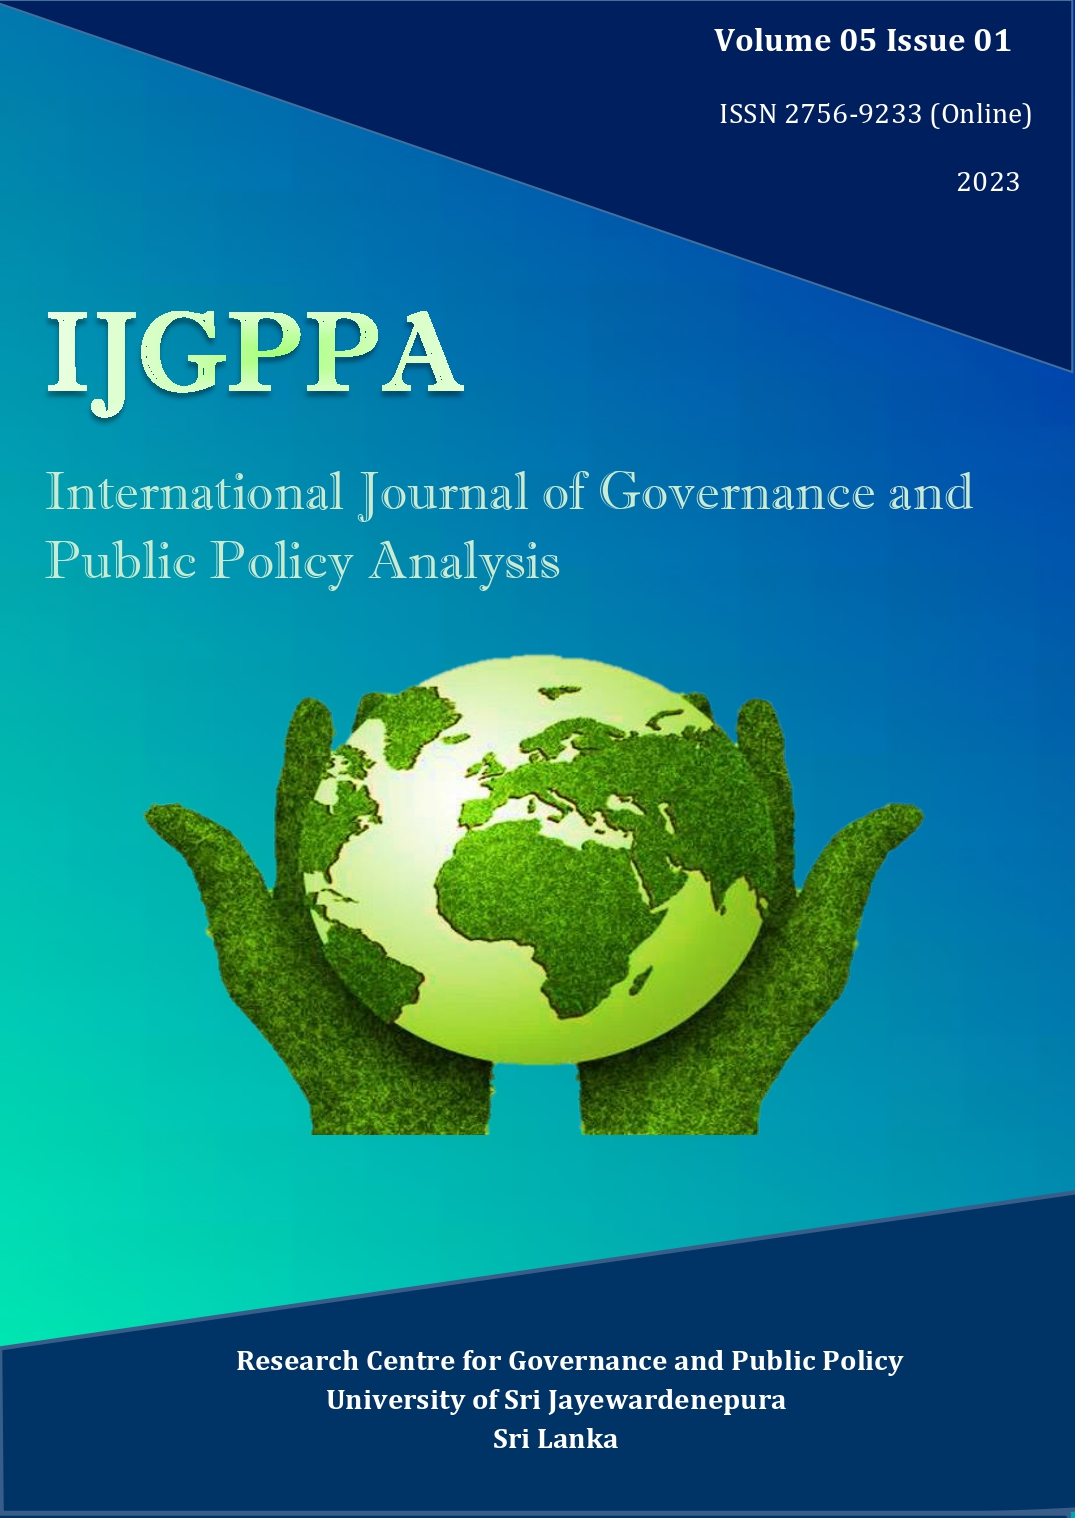 					View Vol. 5 No. 01 (2023): International Journal of Governance and Public Policy Analysis - IJGPPA 
				